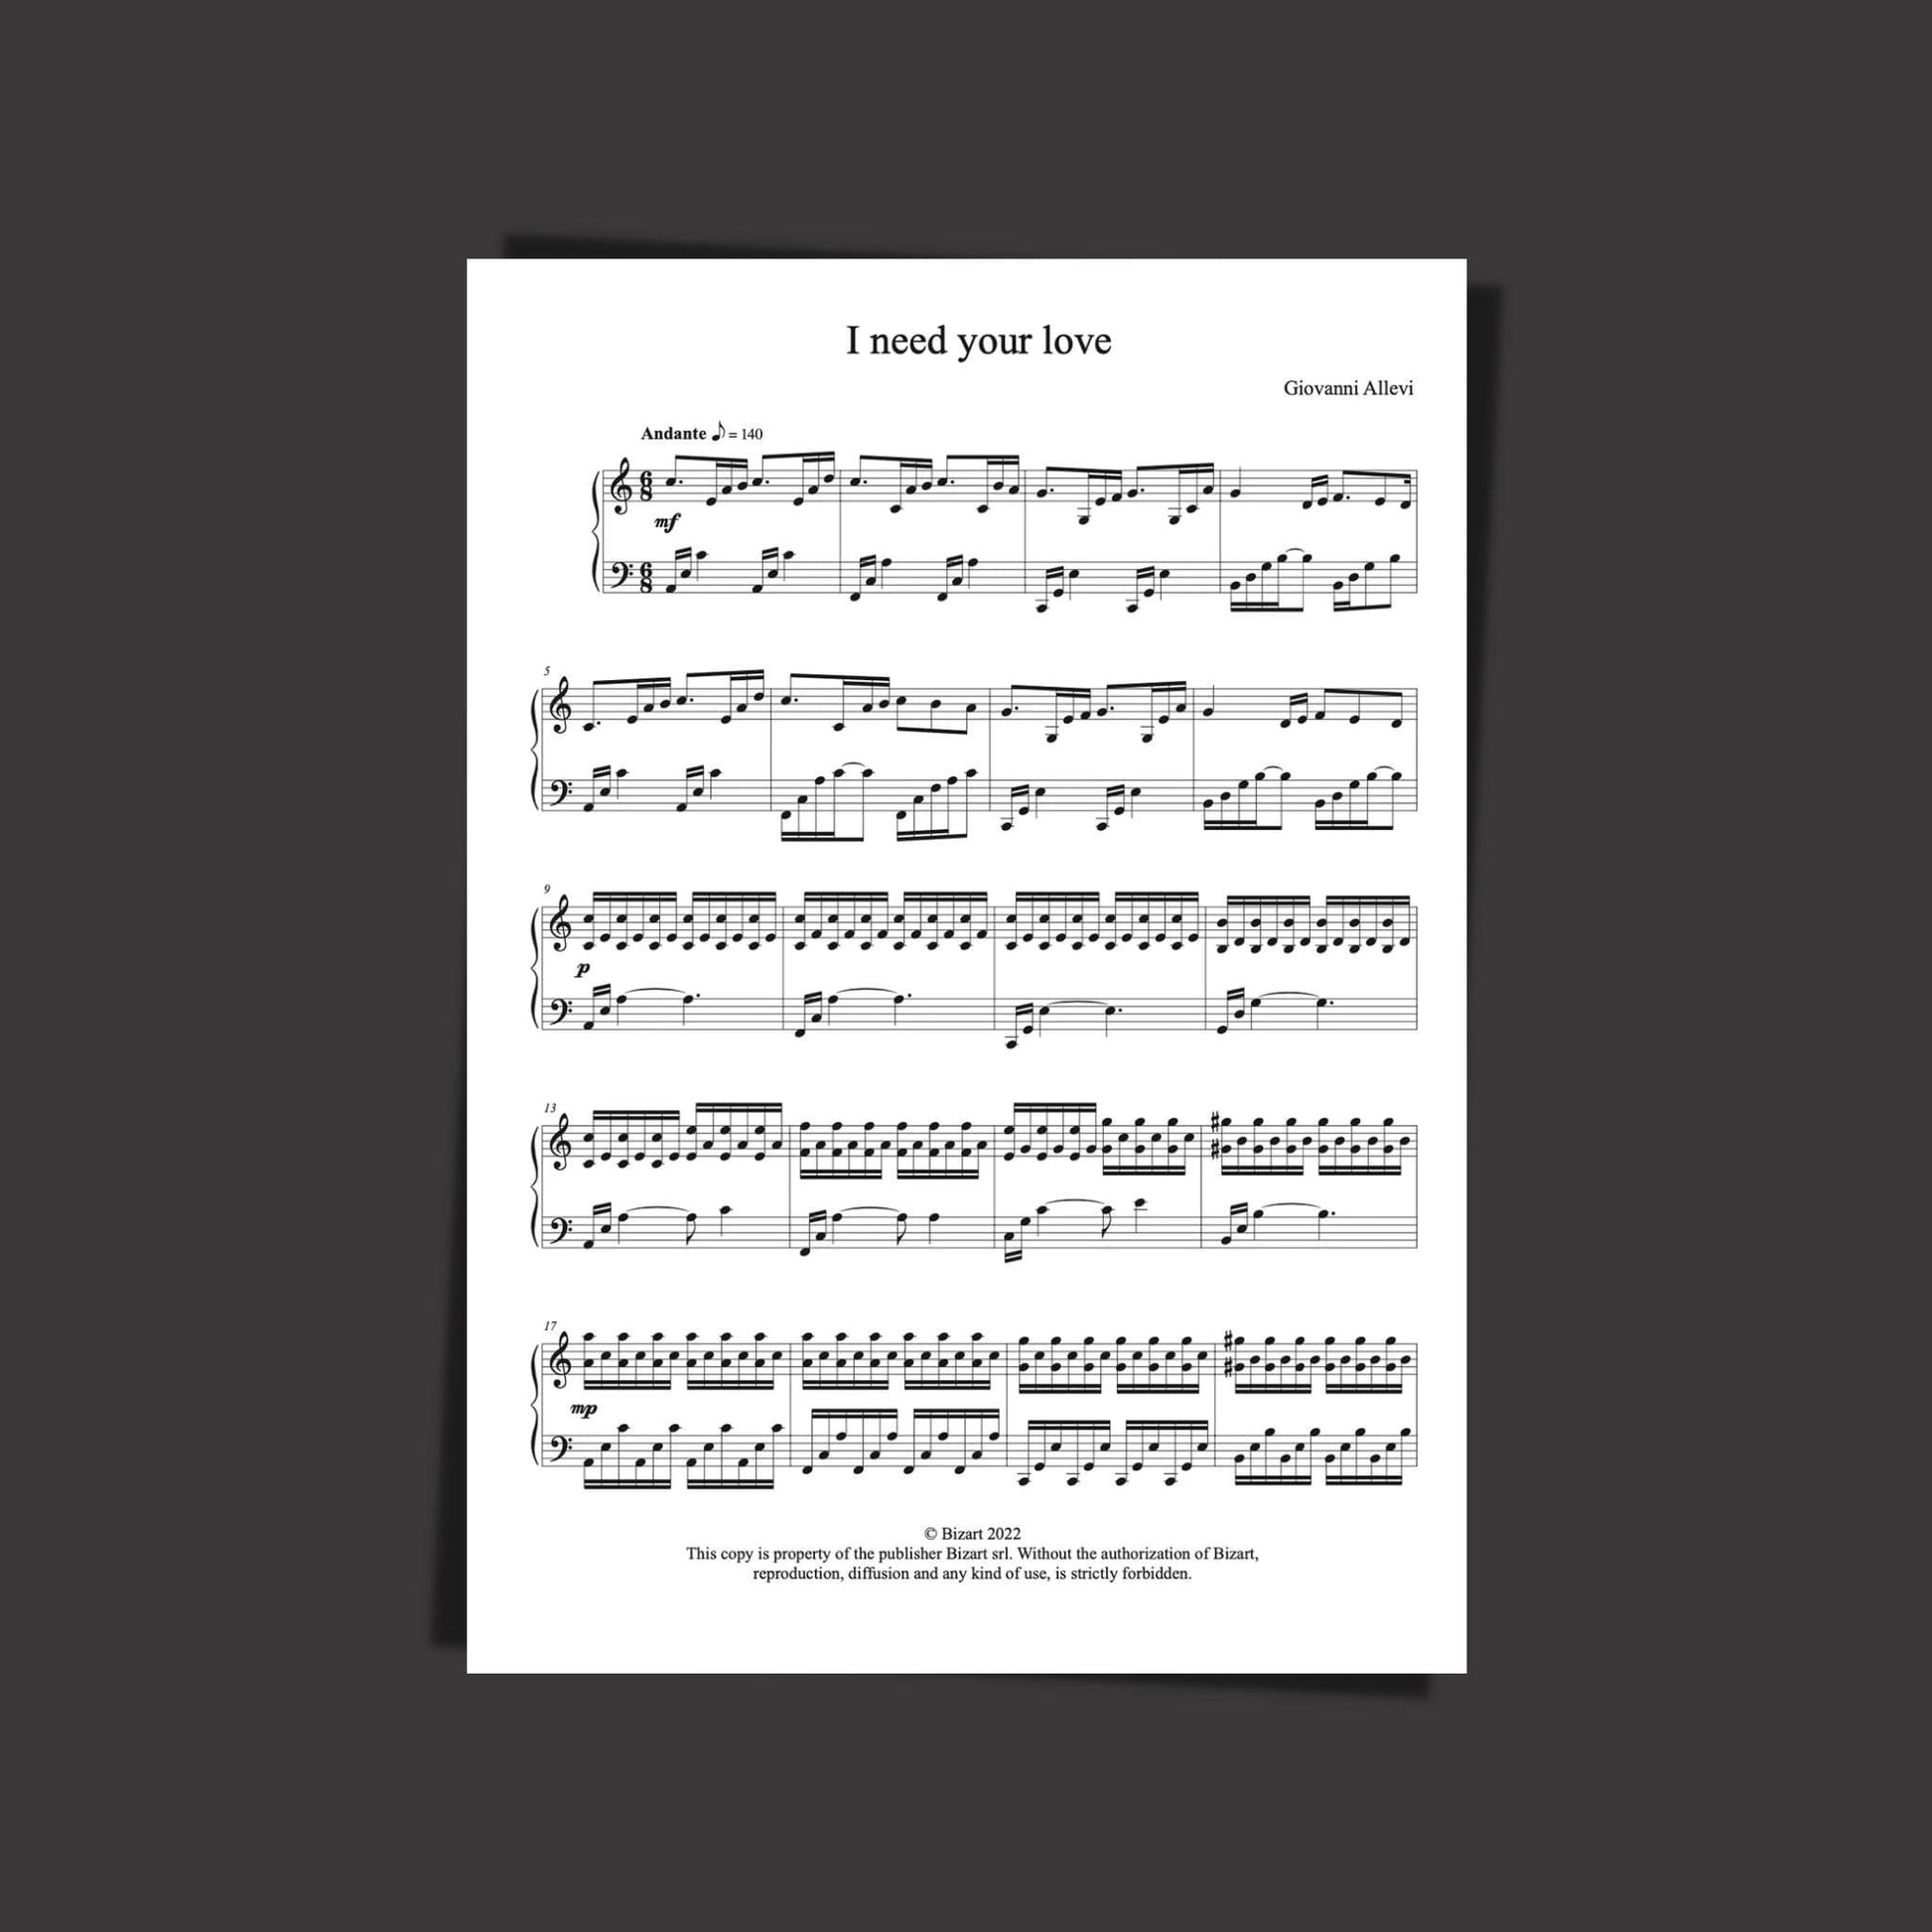 I NEED YOUR LOVE  by composer and pianist GIOVANNI ALLEVI - digital sheet music opening